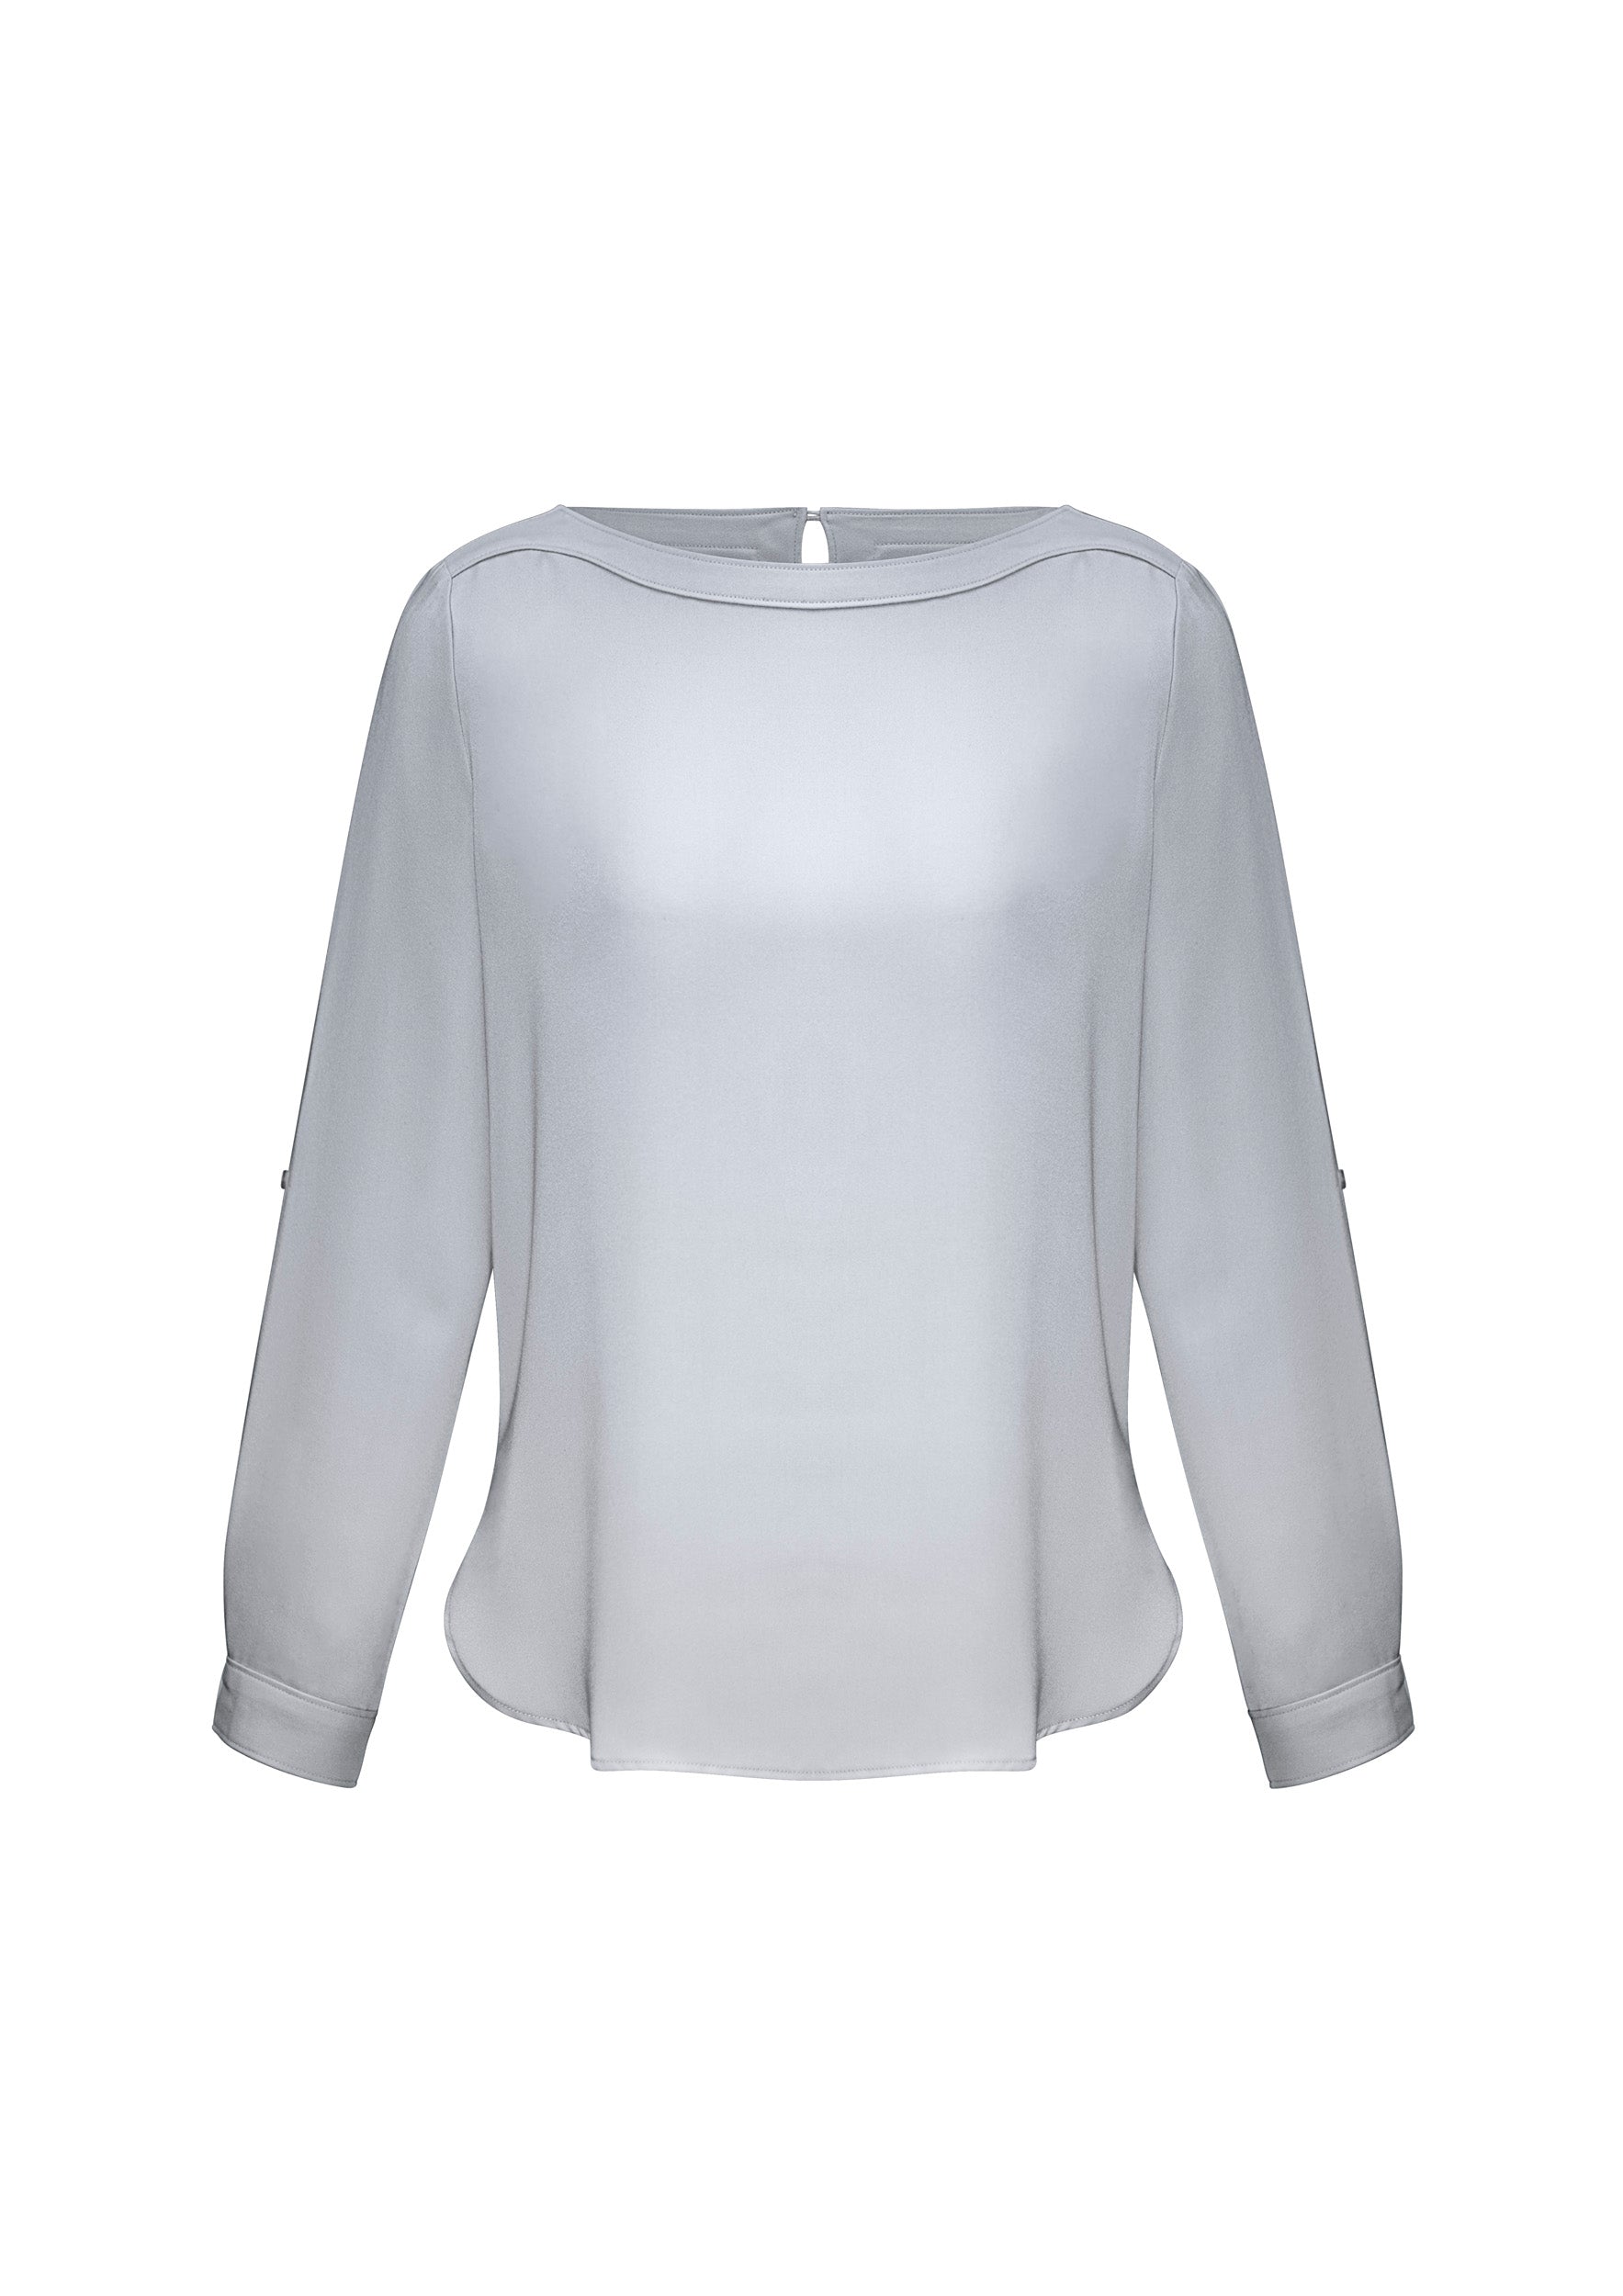 Womens Madison Boatneck Top